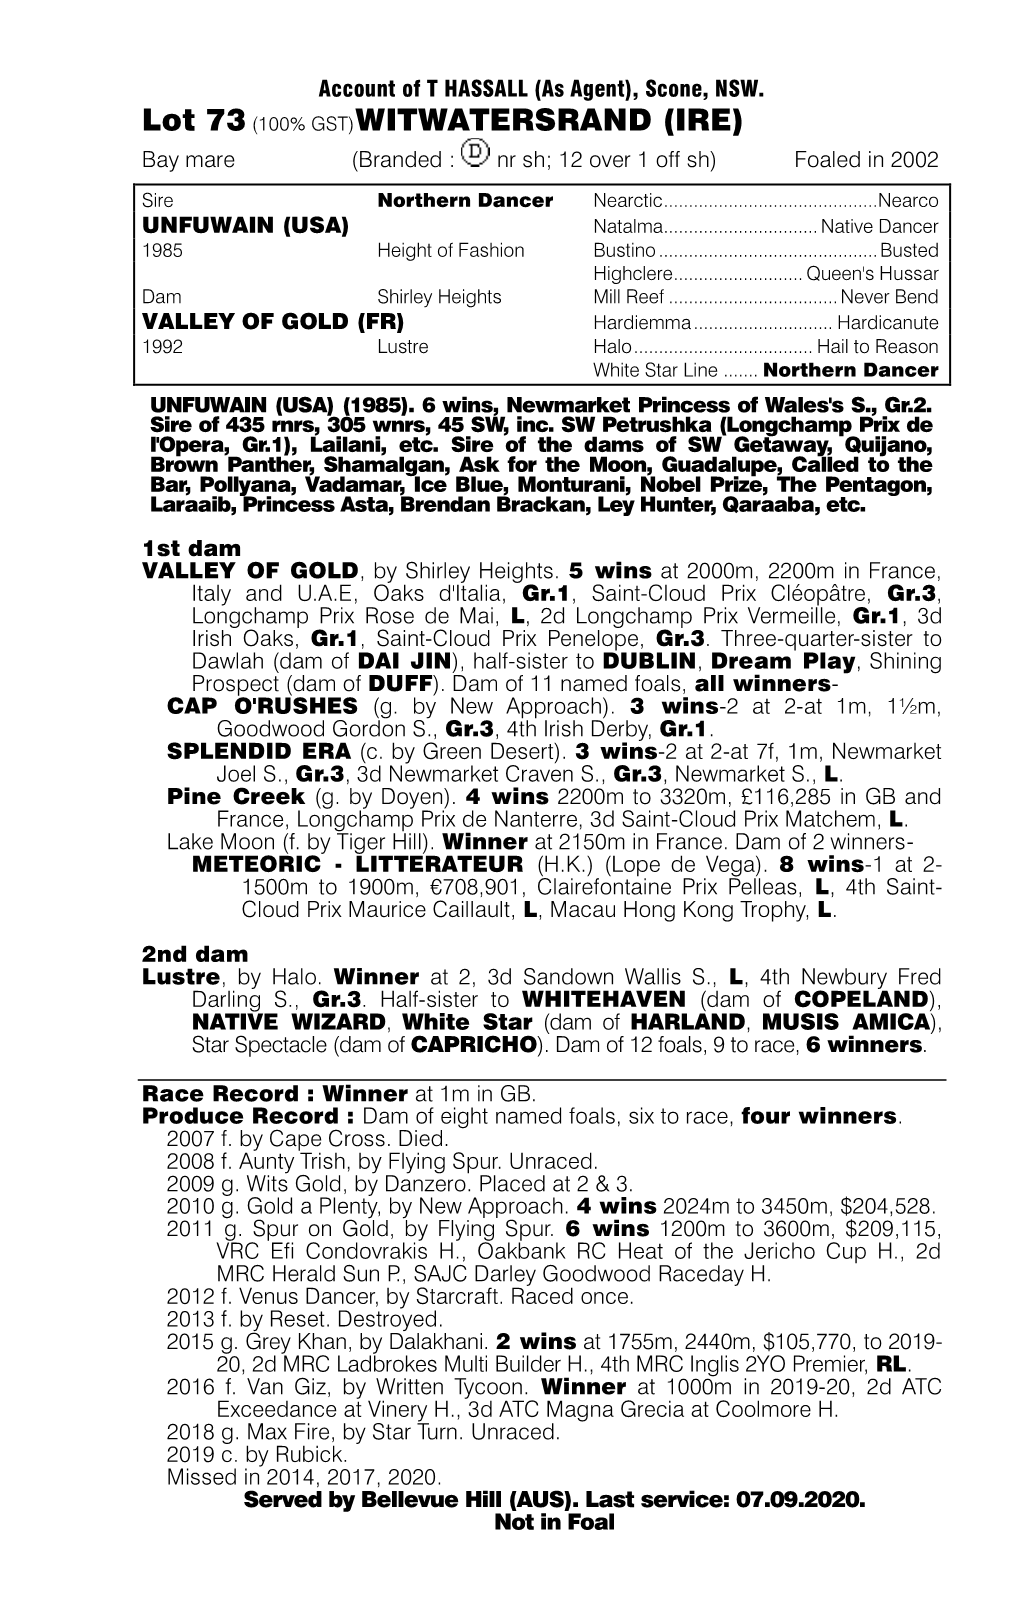 Lot 73 (100% GST)WITWATERSRAND (IRE) Bay Mare (Branded : Nr Sh; 12 Over 1 Off Sh) Foaled in 2002